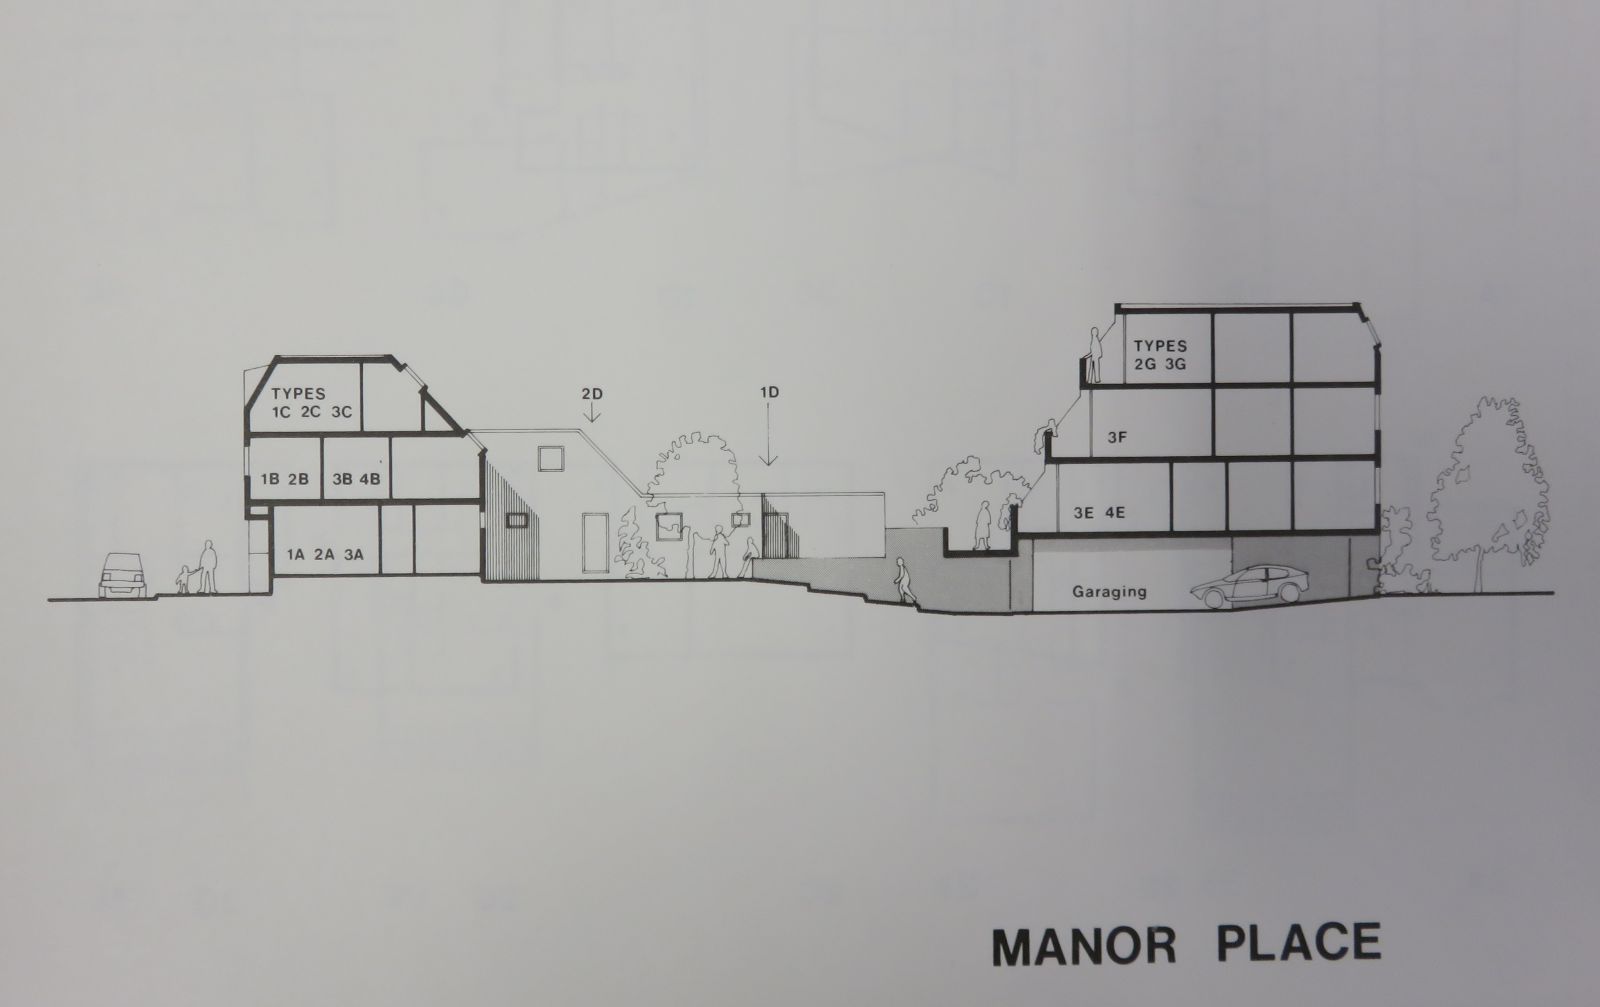 King Street Housing Society: elevation plan of Manor Place. (Archive ref: JCAD-3-CAM-KING-14-2-1977)